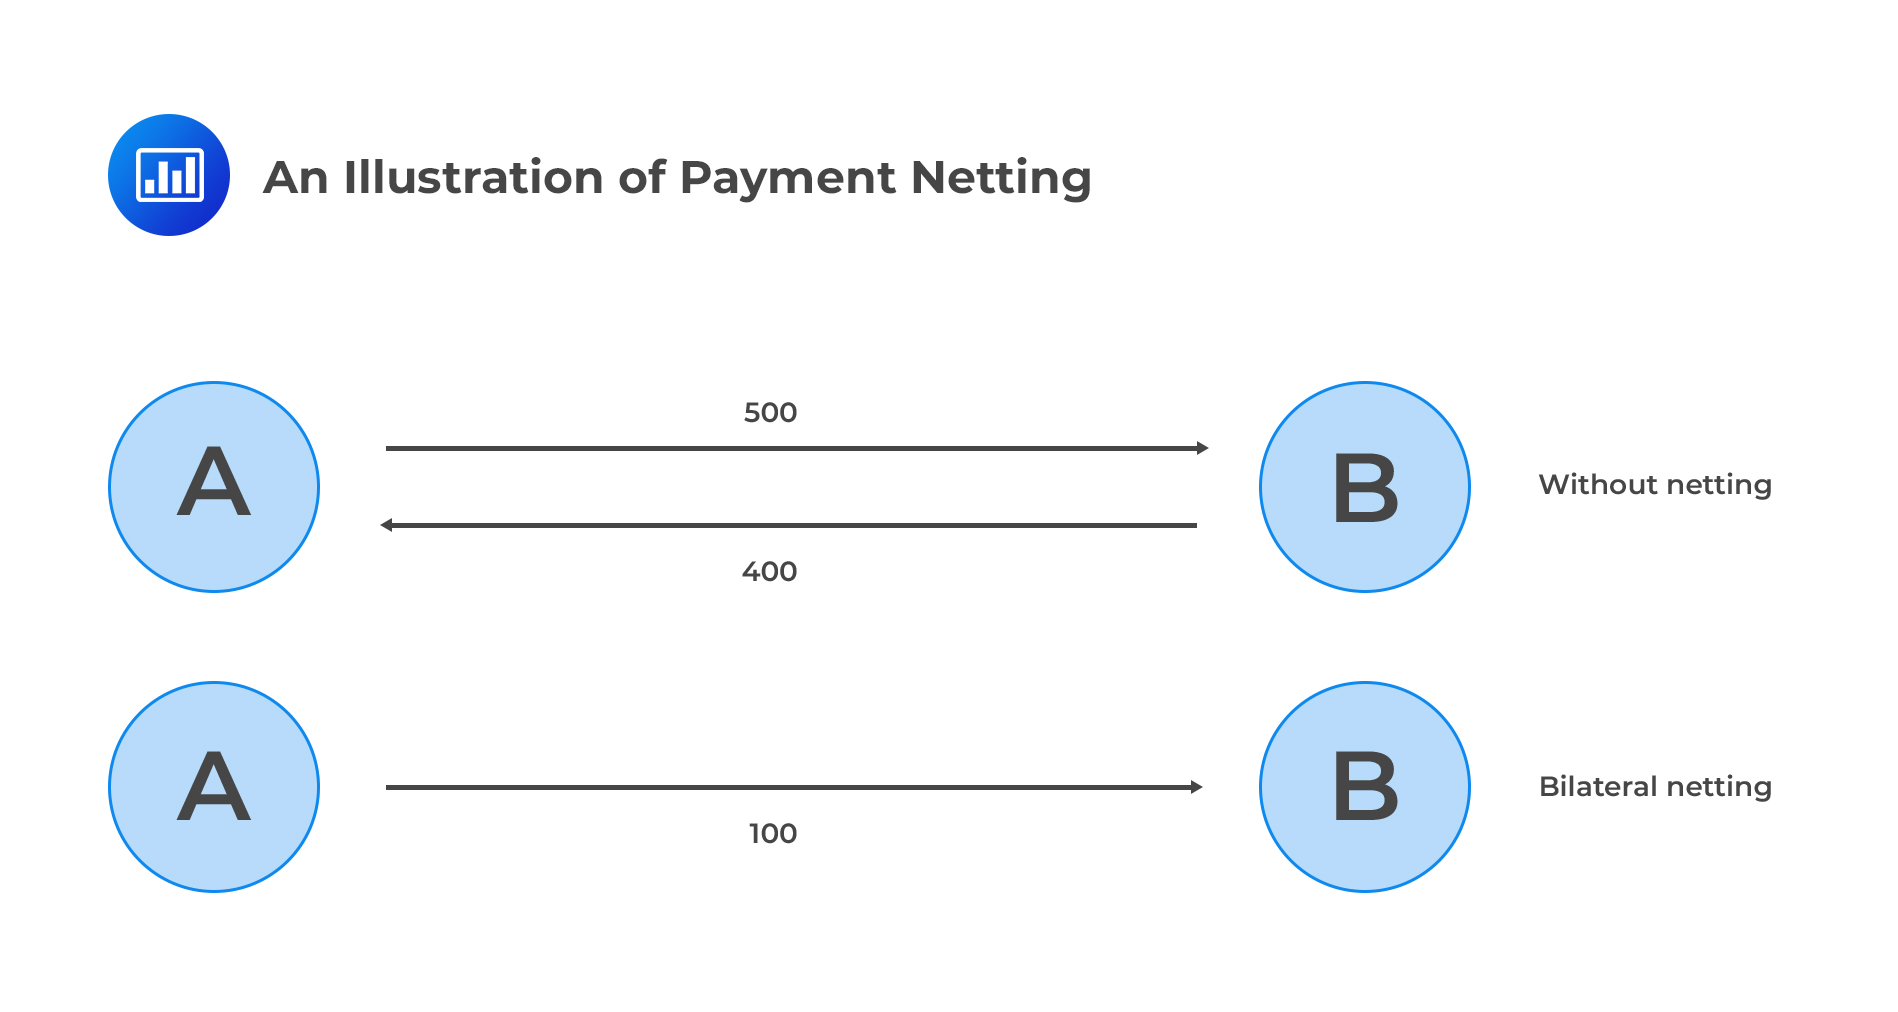 An Illustration of Payment Netting